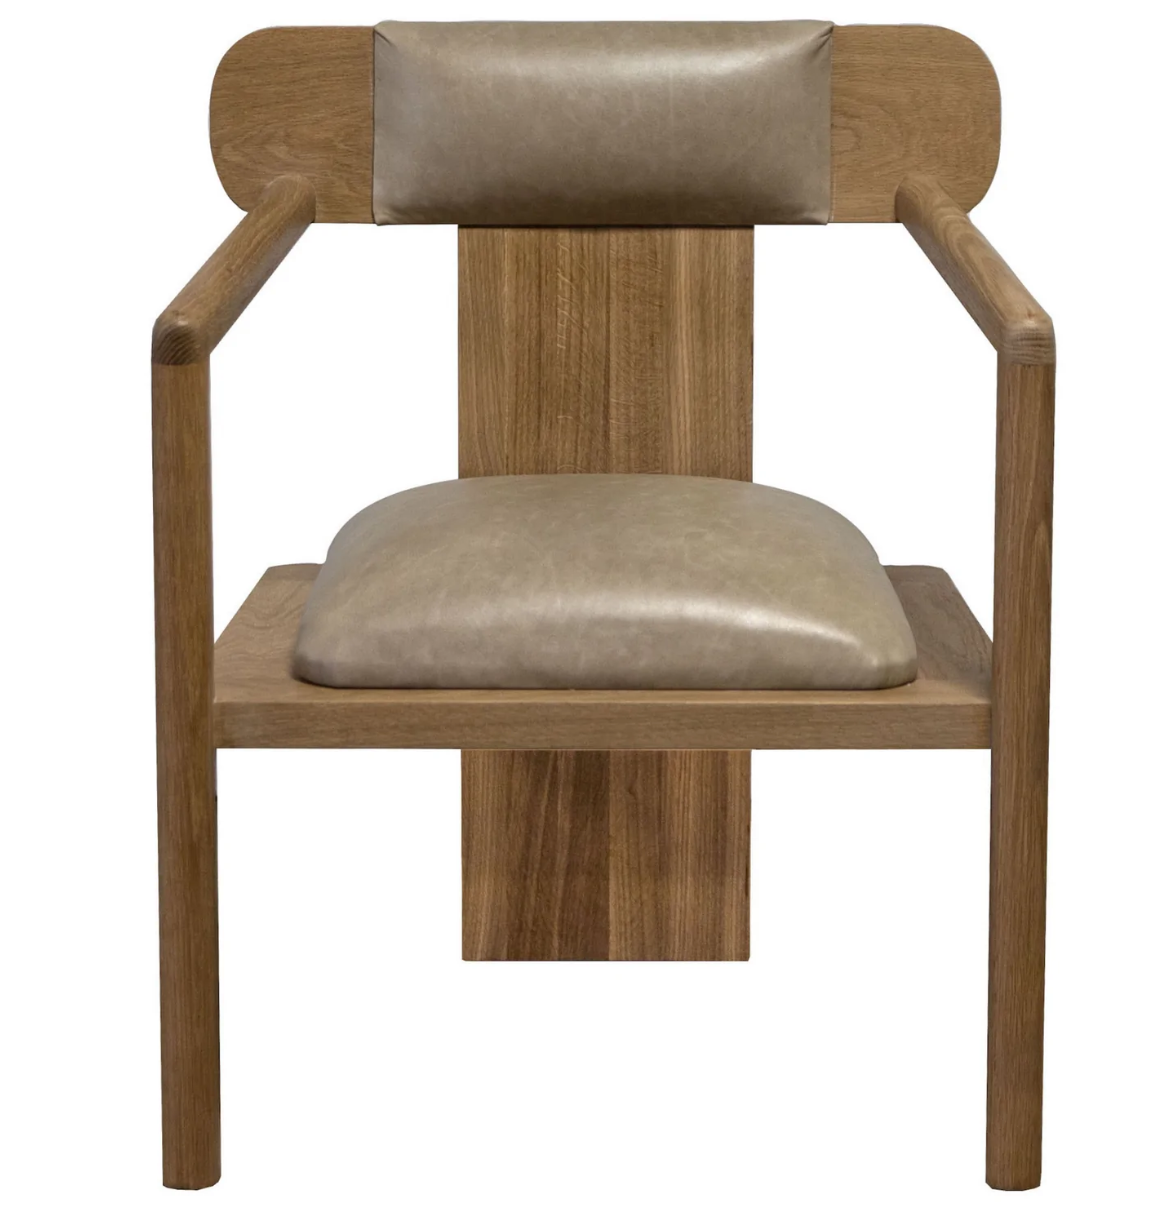 Experience Superior Craftsmanship with the Kiva Chair from Maison Rose